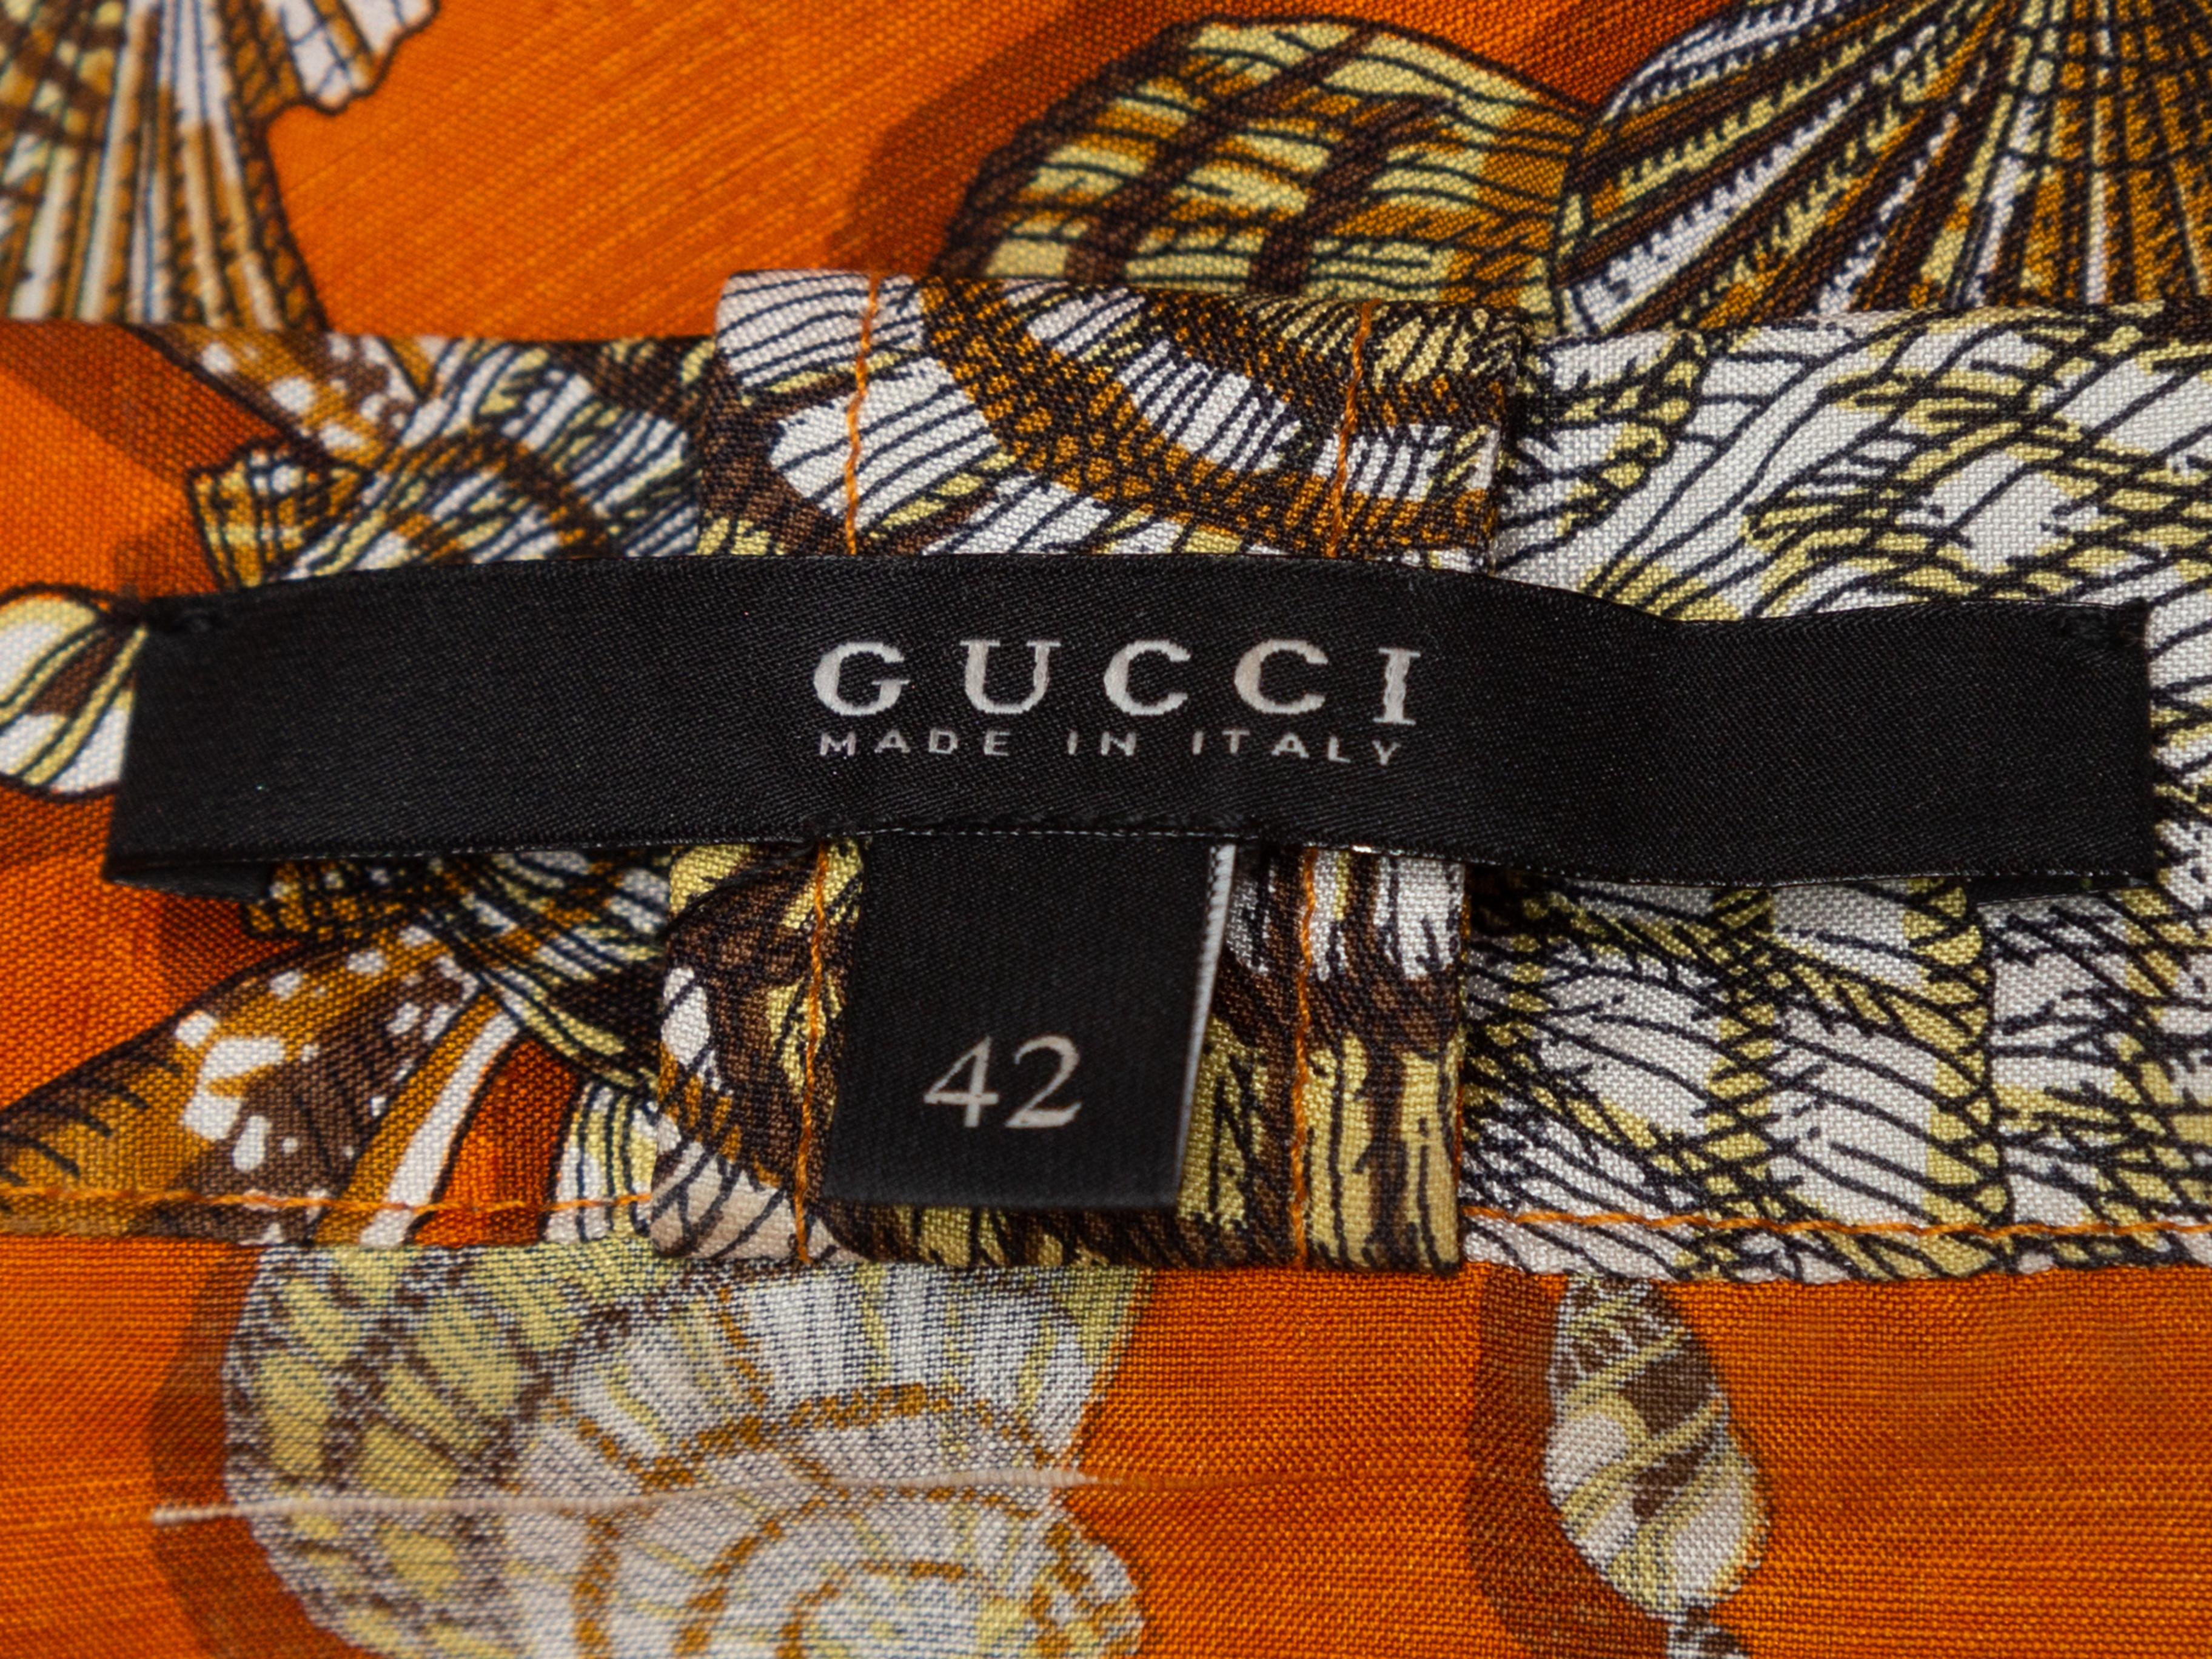 Product details: Orange and multicolor silk seashell print dress by Gucci. Short puff sleeves. V-neck featuring pussybow accent. Designer size 42. 36